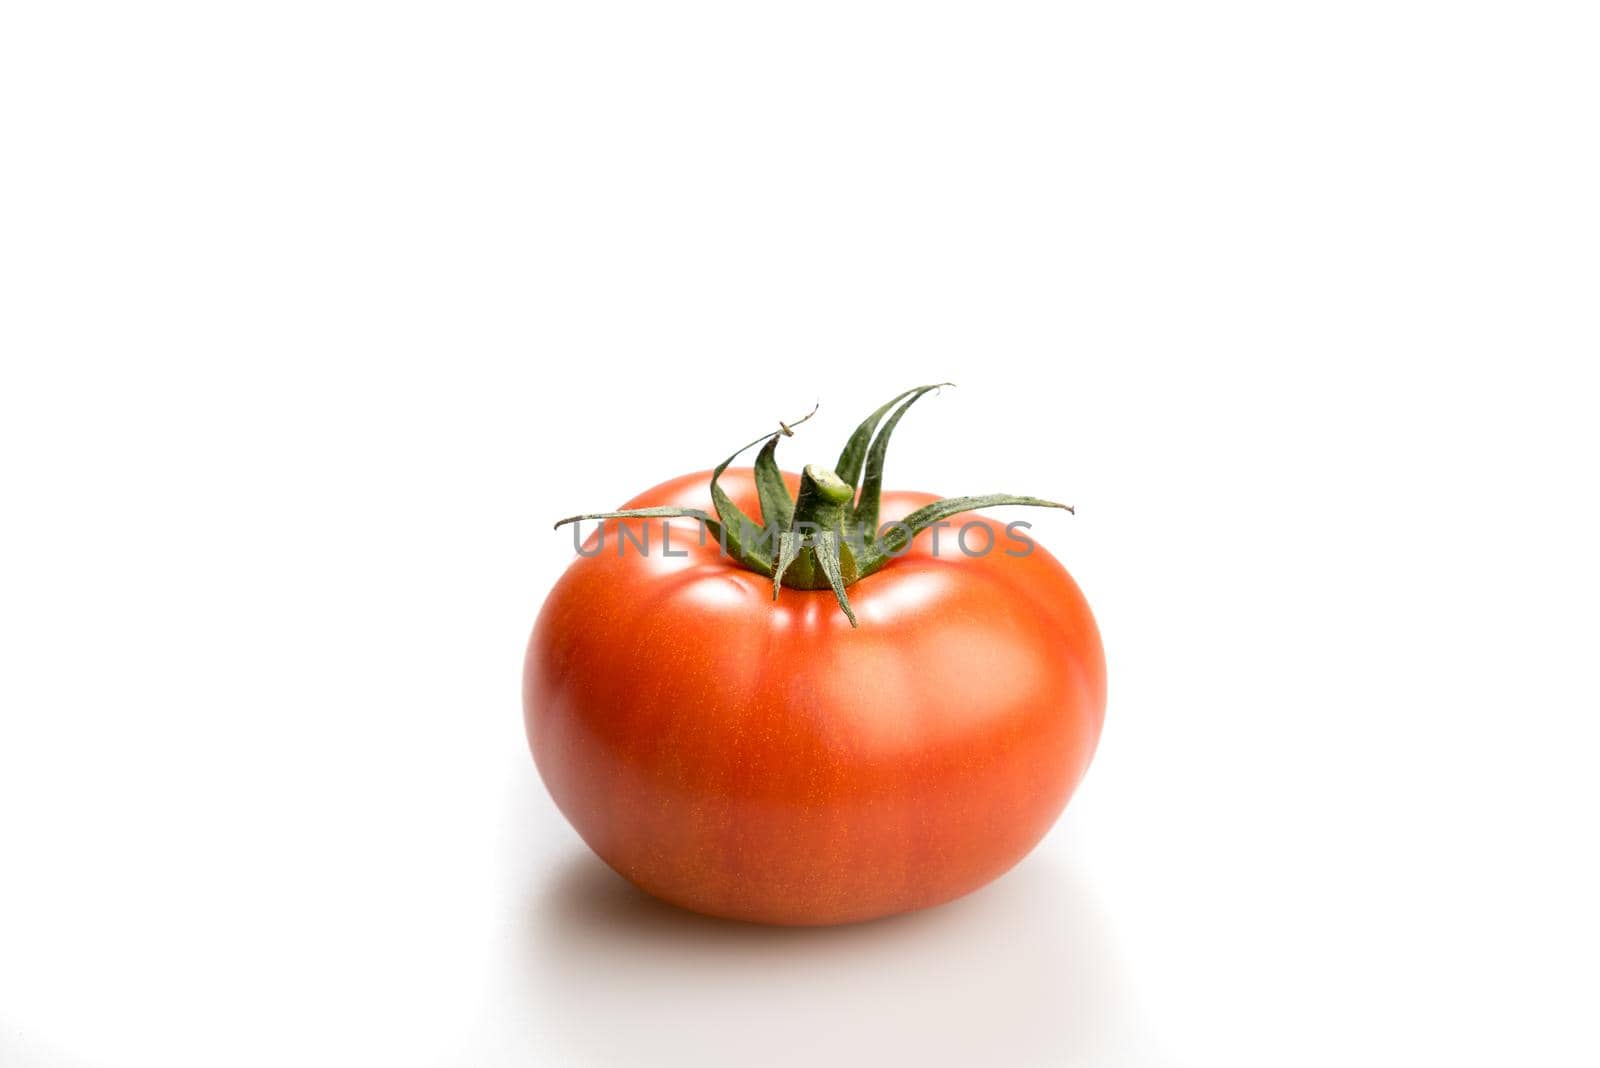 One realistic looking  tomato lying isolated in a white background  by LeoniekvanderVliet